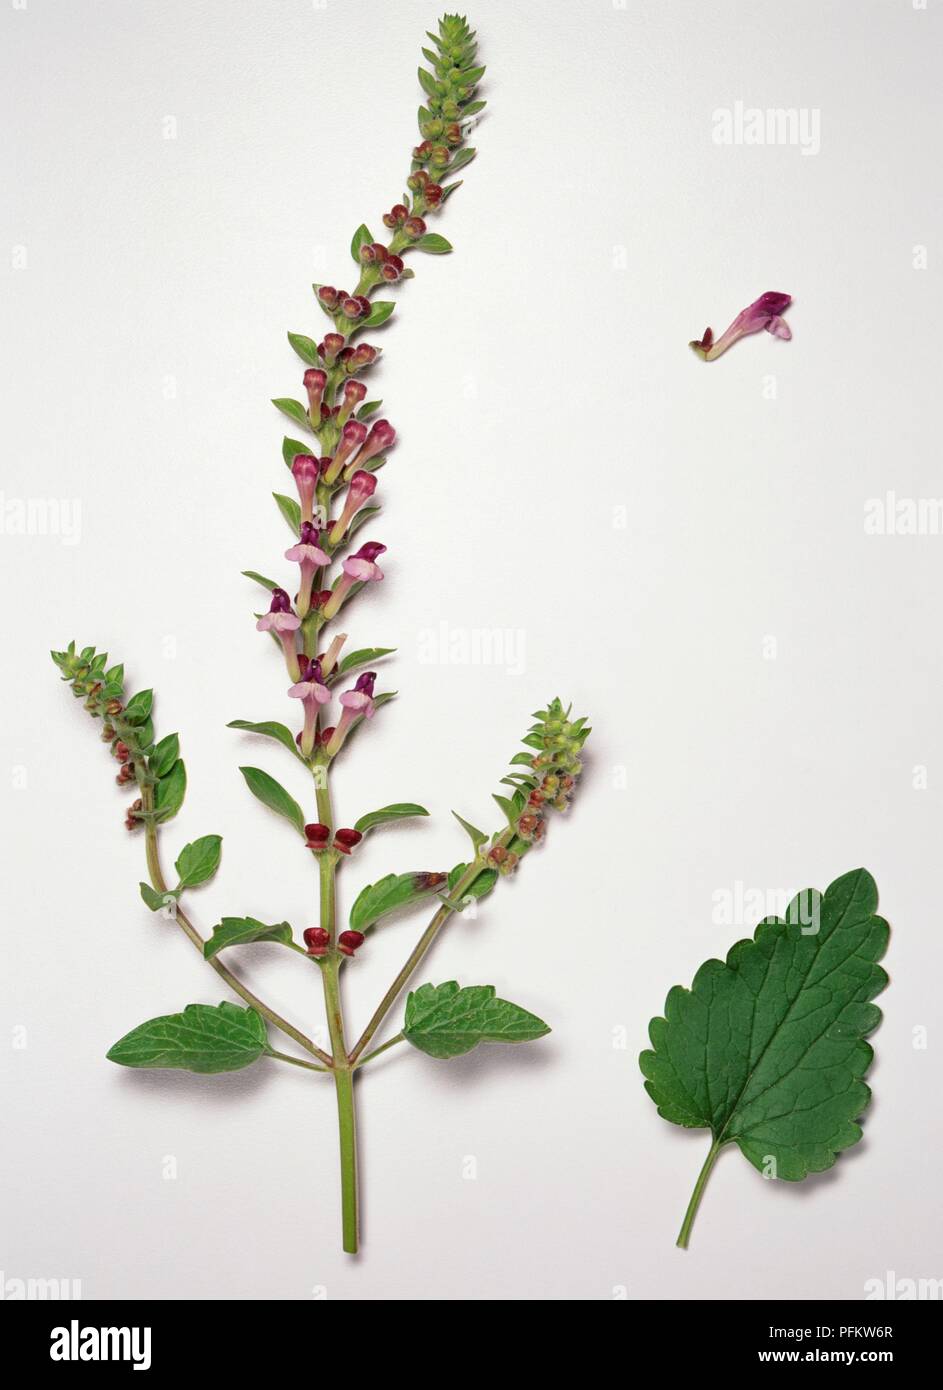 Scutellaria columnae (Skullcap) with small pink flower, green buds and leaves on long ste, separate flowere and toothed leaf Stock Photo